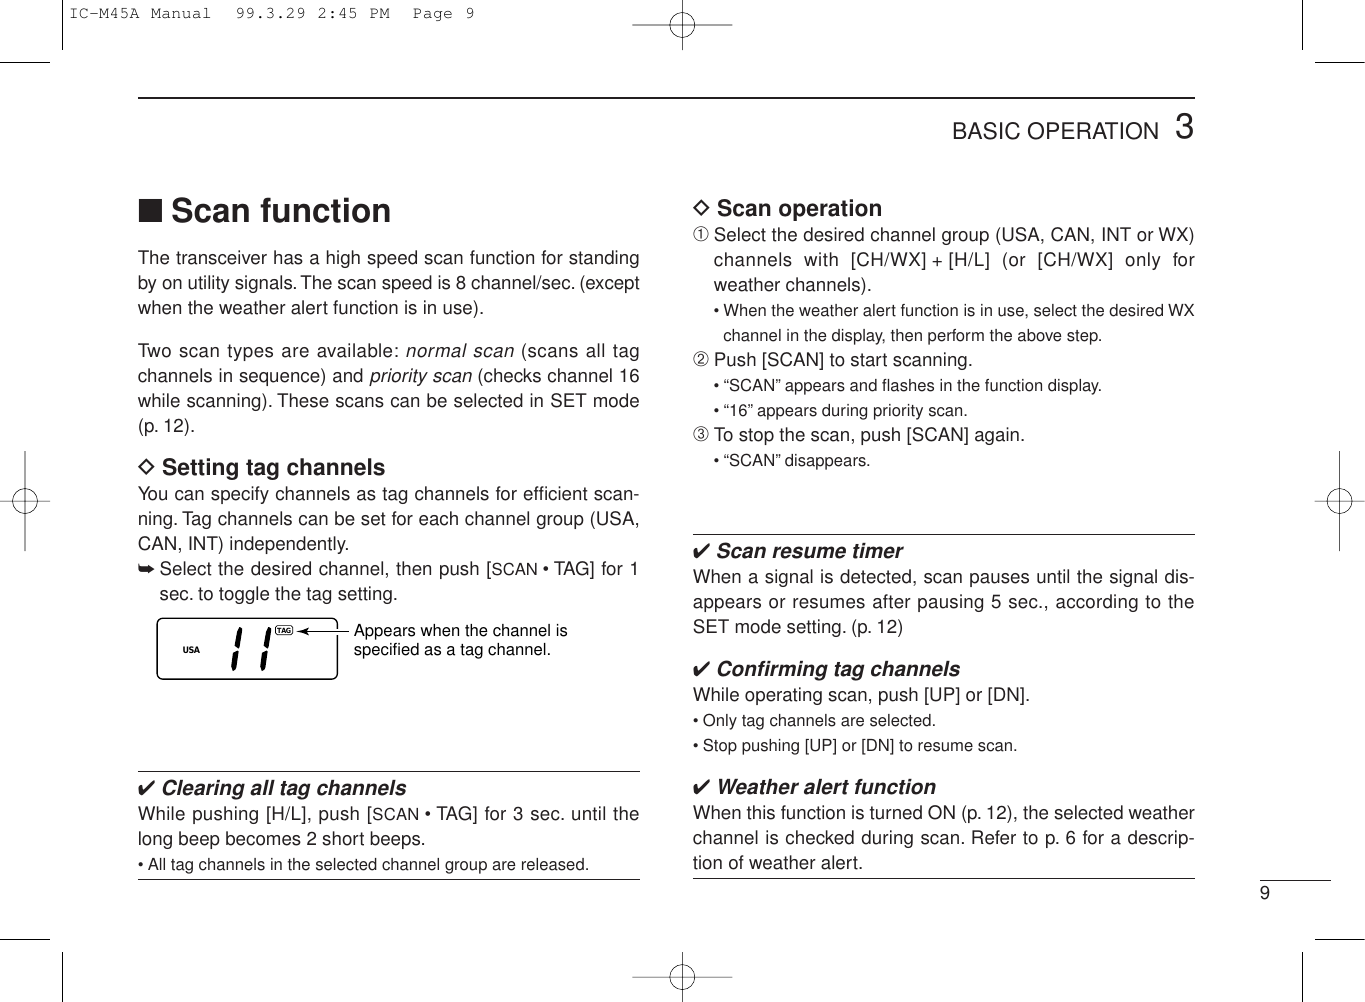 93BASIC OPERATION■Scan functionThe transceiver has a high speed scan function for standingby on utility signals. The scan speed is 8 channel/sec. (exceptwhen the weather alert function is in use).Two scan types are available:normal scan (scans all tagchannels in sequence) and priority scan (checks channel 16while scanning). These scans can be selected in SET mode(p. 12).DSetting tag channelsYou can specify channels as tag channels for efﬁcient scan-ning. Tag channels can be set for each channel group (USA,CAN, INT) independently.➥Select the desired channel, then push [SCAN • TAG] for 1sec. to toggle the tag setting.✔Clearing all tag channelsWhile pushing [H/L], push [SCAN • TAG] for 3 sec. until thelong beep becomes 2 short beeps.• All tag channels in the selected channel group are released.USATAGAppears when the channel isspecified as a tag channel.DScan operation➀Select the desired channel group (USA, CAN, INT or WX)channels with [CH/WX] + [H/L] (or [CH/WX] only forweather channels).• When the weather alert function is in use, select the desired WXchannel in the display, then perform the above step.➁Push [SCAN] to start scanning.• “SCAN” appears and ﬂashes in the function display.• “16” appears during priority scan.➂To stop the scan, push [SCAN] again.• “SCAN” disappears.✔Scan resume timerWhen a signal is detected, scan pauses until the signal dis-appears or resumes after pausing 5 sec., according to theSET mode setting. (p. 12)✔Conﬁrming tag channelsWhile operating scan, push [UP] or [DN].• Only tag channels are selected.• Stop pushing [UP] or [DN] to resume scan.✔Weather alert functionWhen this function is turned ON (p. 12), the selected weatherchannel is checked during scan. Refer to p. 6 for a descrip-tion of weather alert.IC-M45A Manual  99.3.29 2:45 PM  Page 9